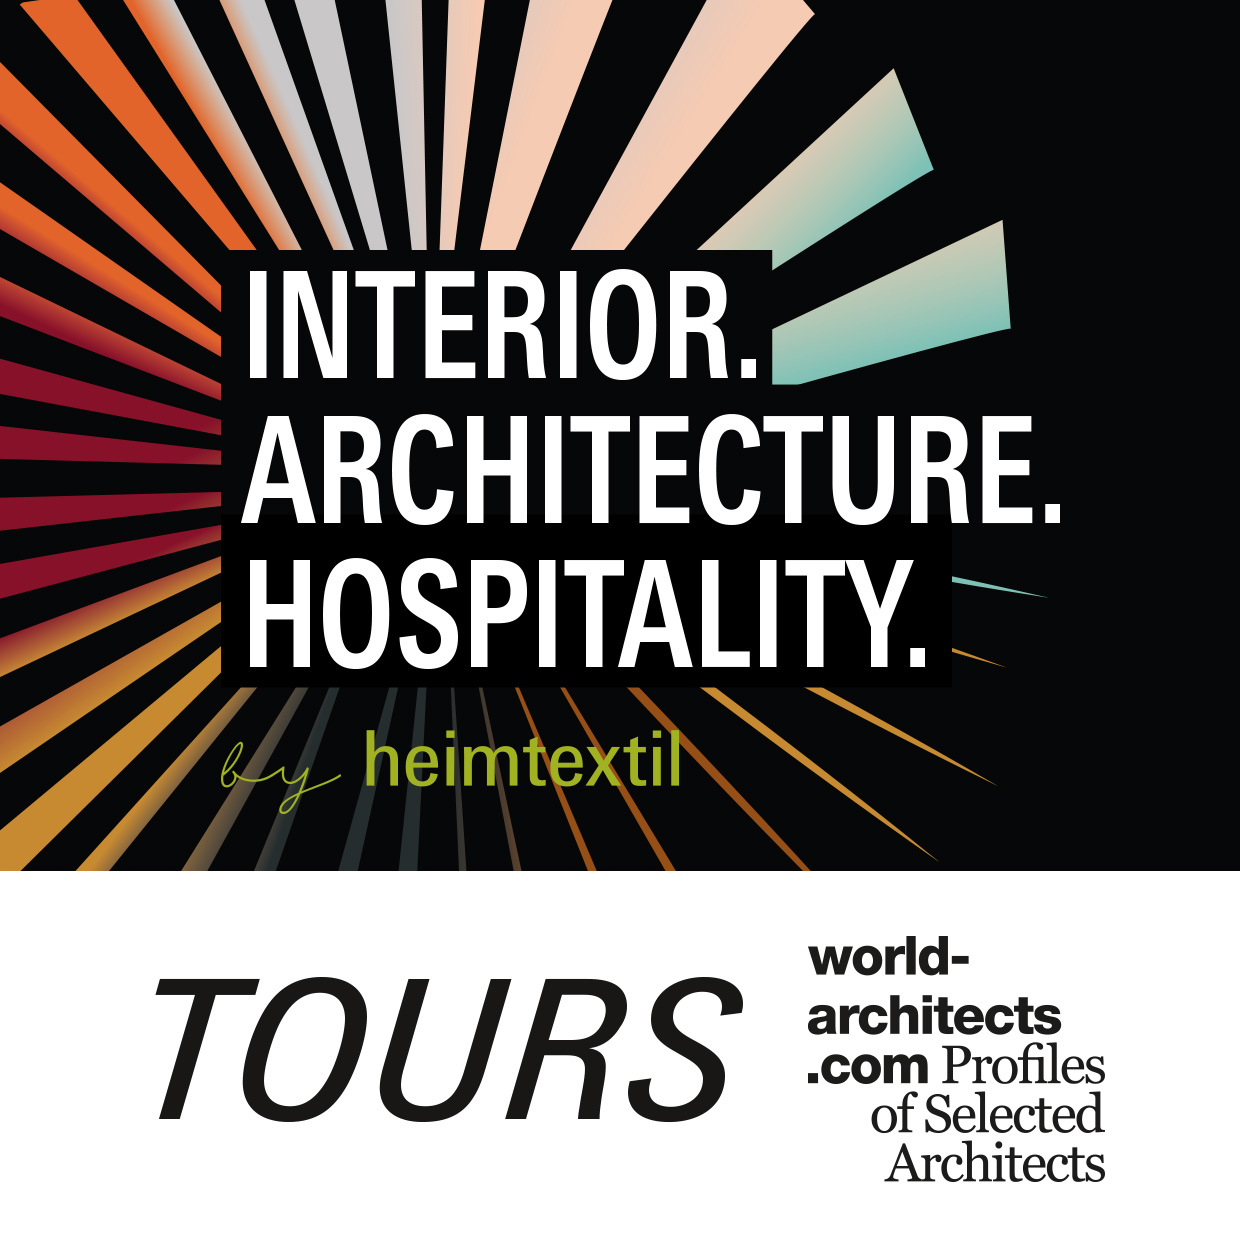 guided-tour-by-world-architects9